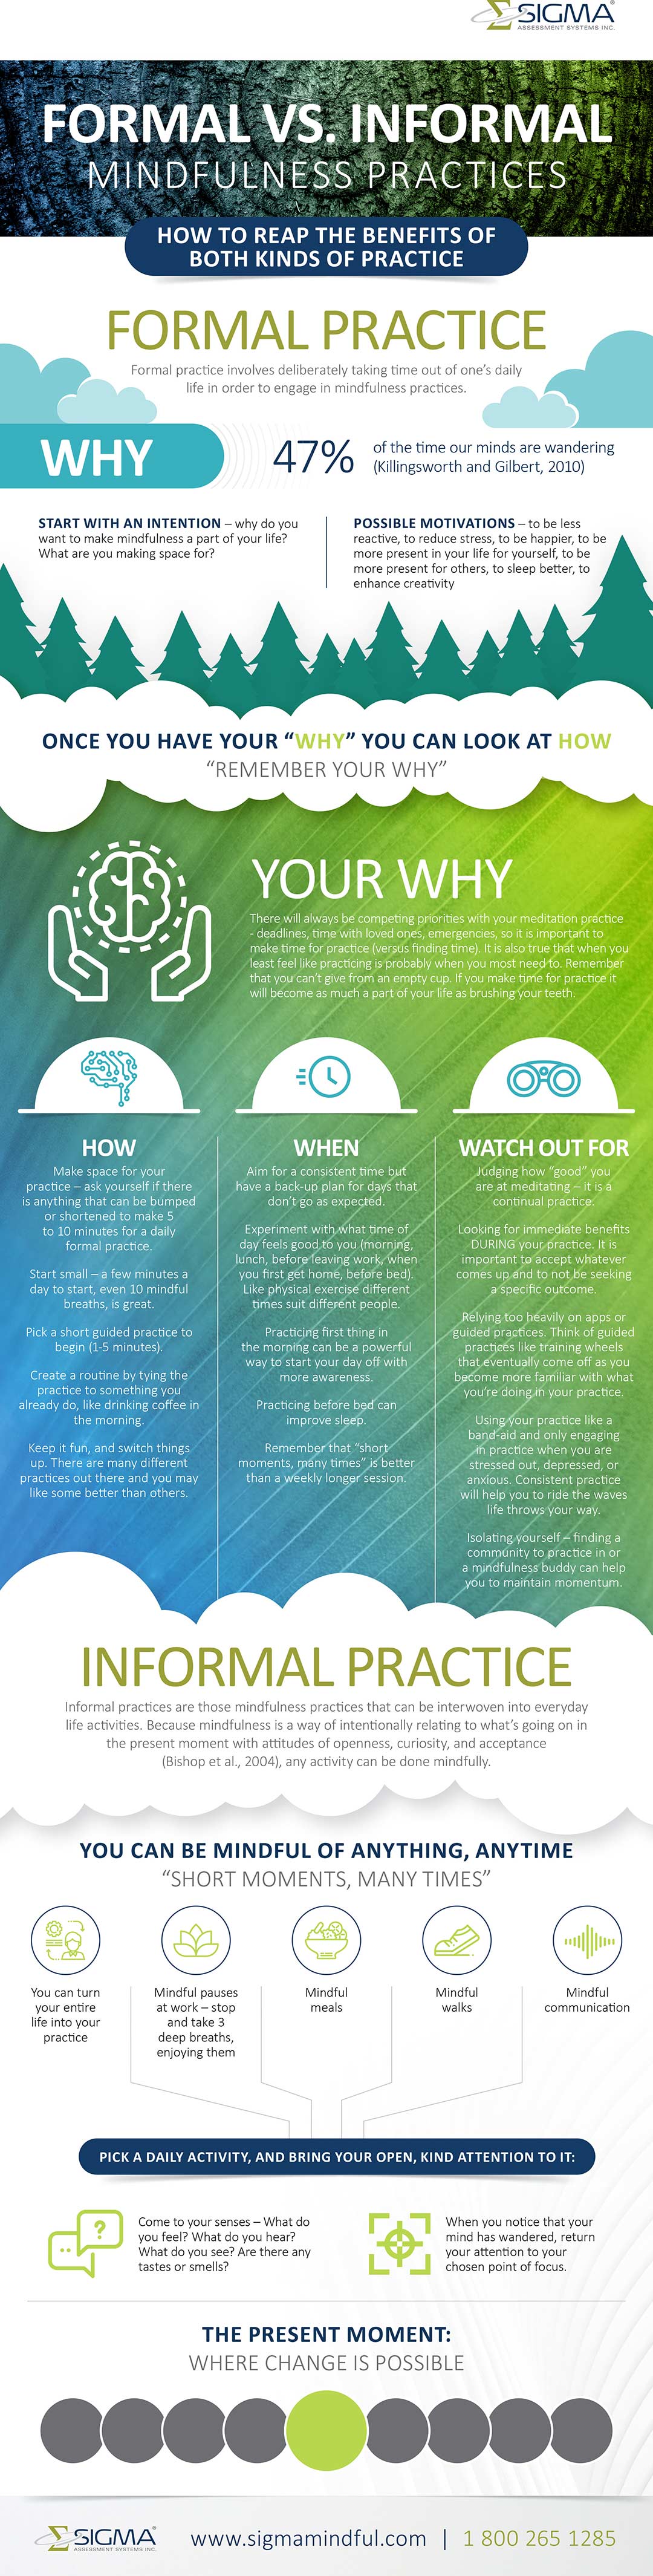 Mindfulness Practice Infographic